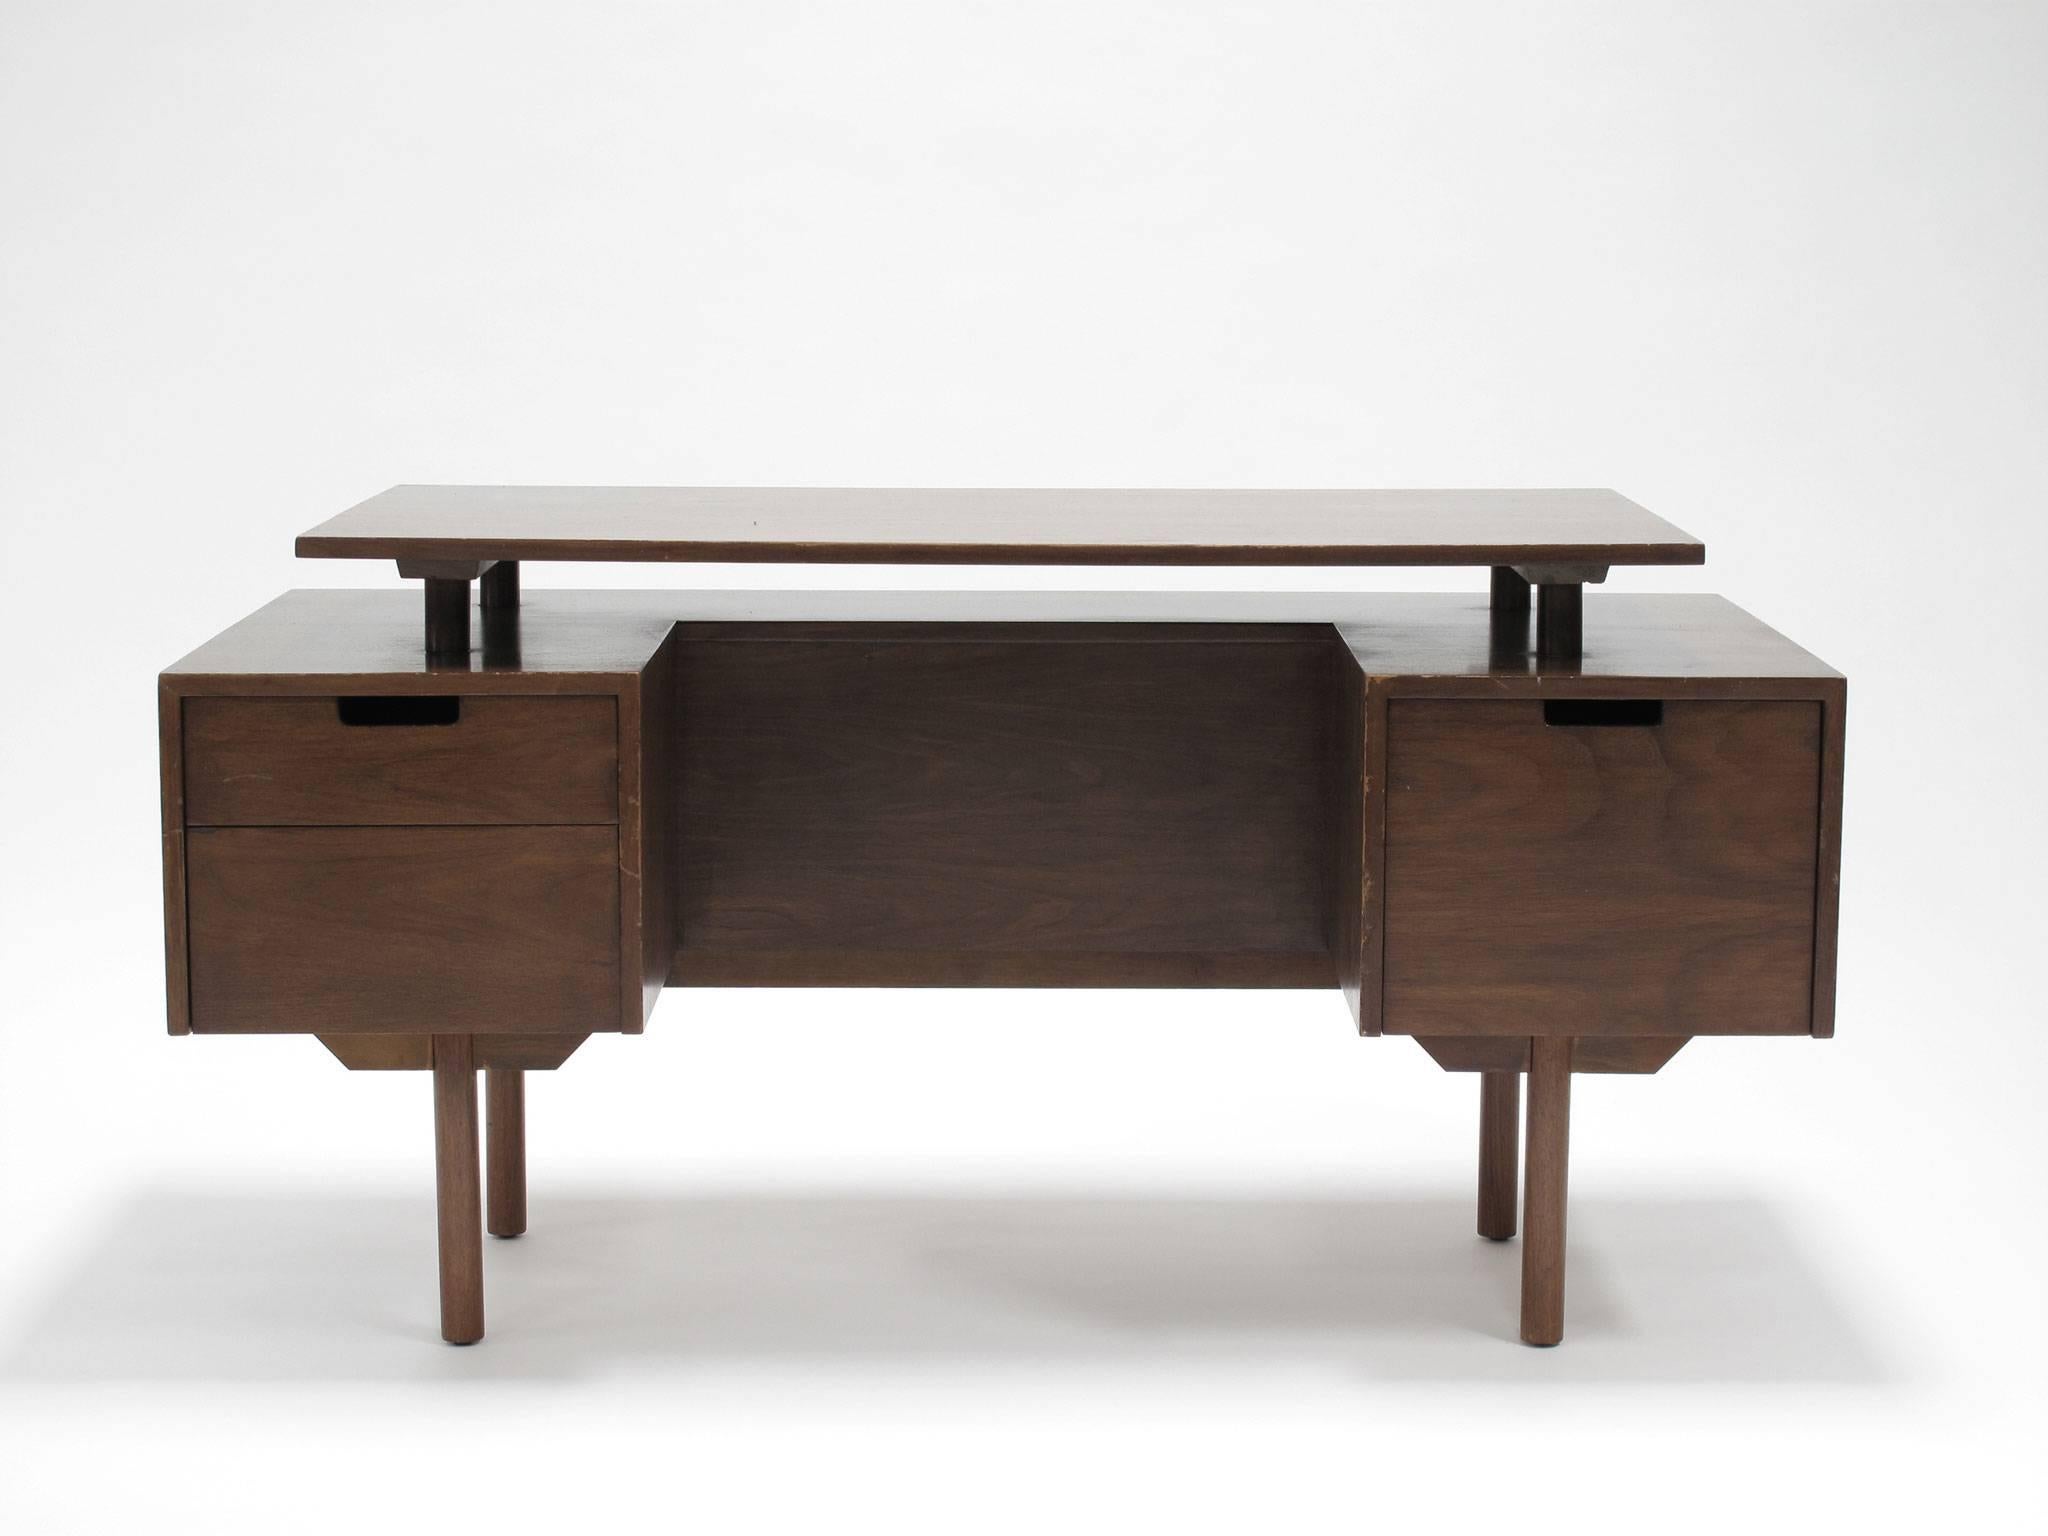 Milo Baughman
Executive desk with floating top, 1960s
Walnut, California Modern Design
Glenn of California

Measurements in inches: 30 high x 58 wide x 28 deep

Condition: good vintage, handsome and functional, double pedestal, three drawers,